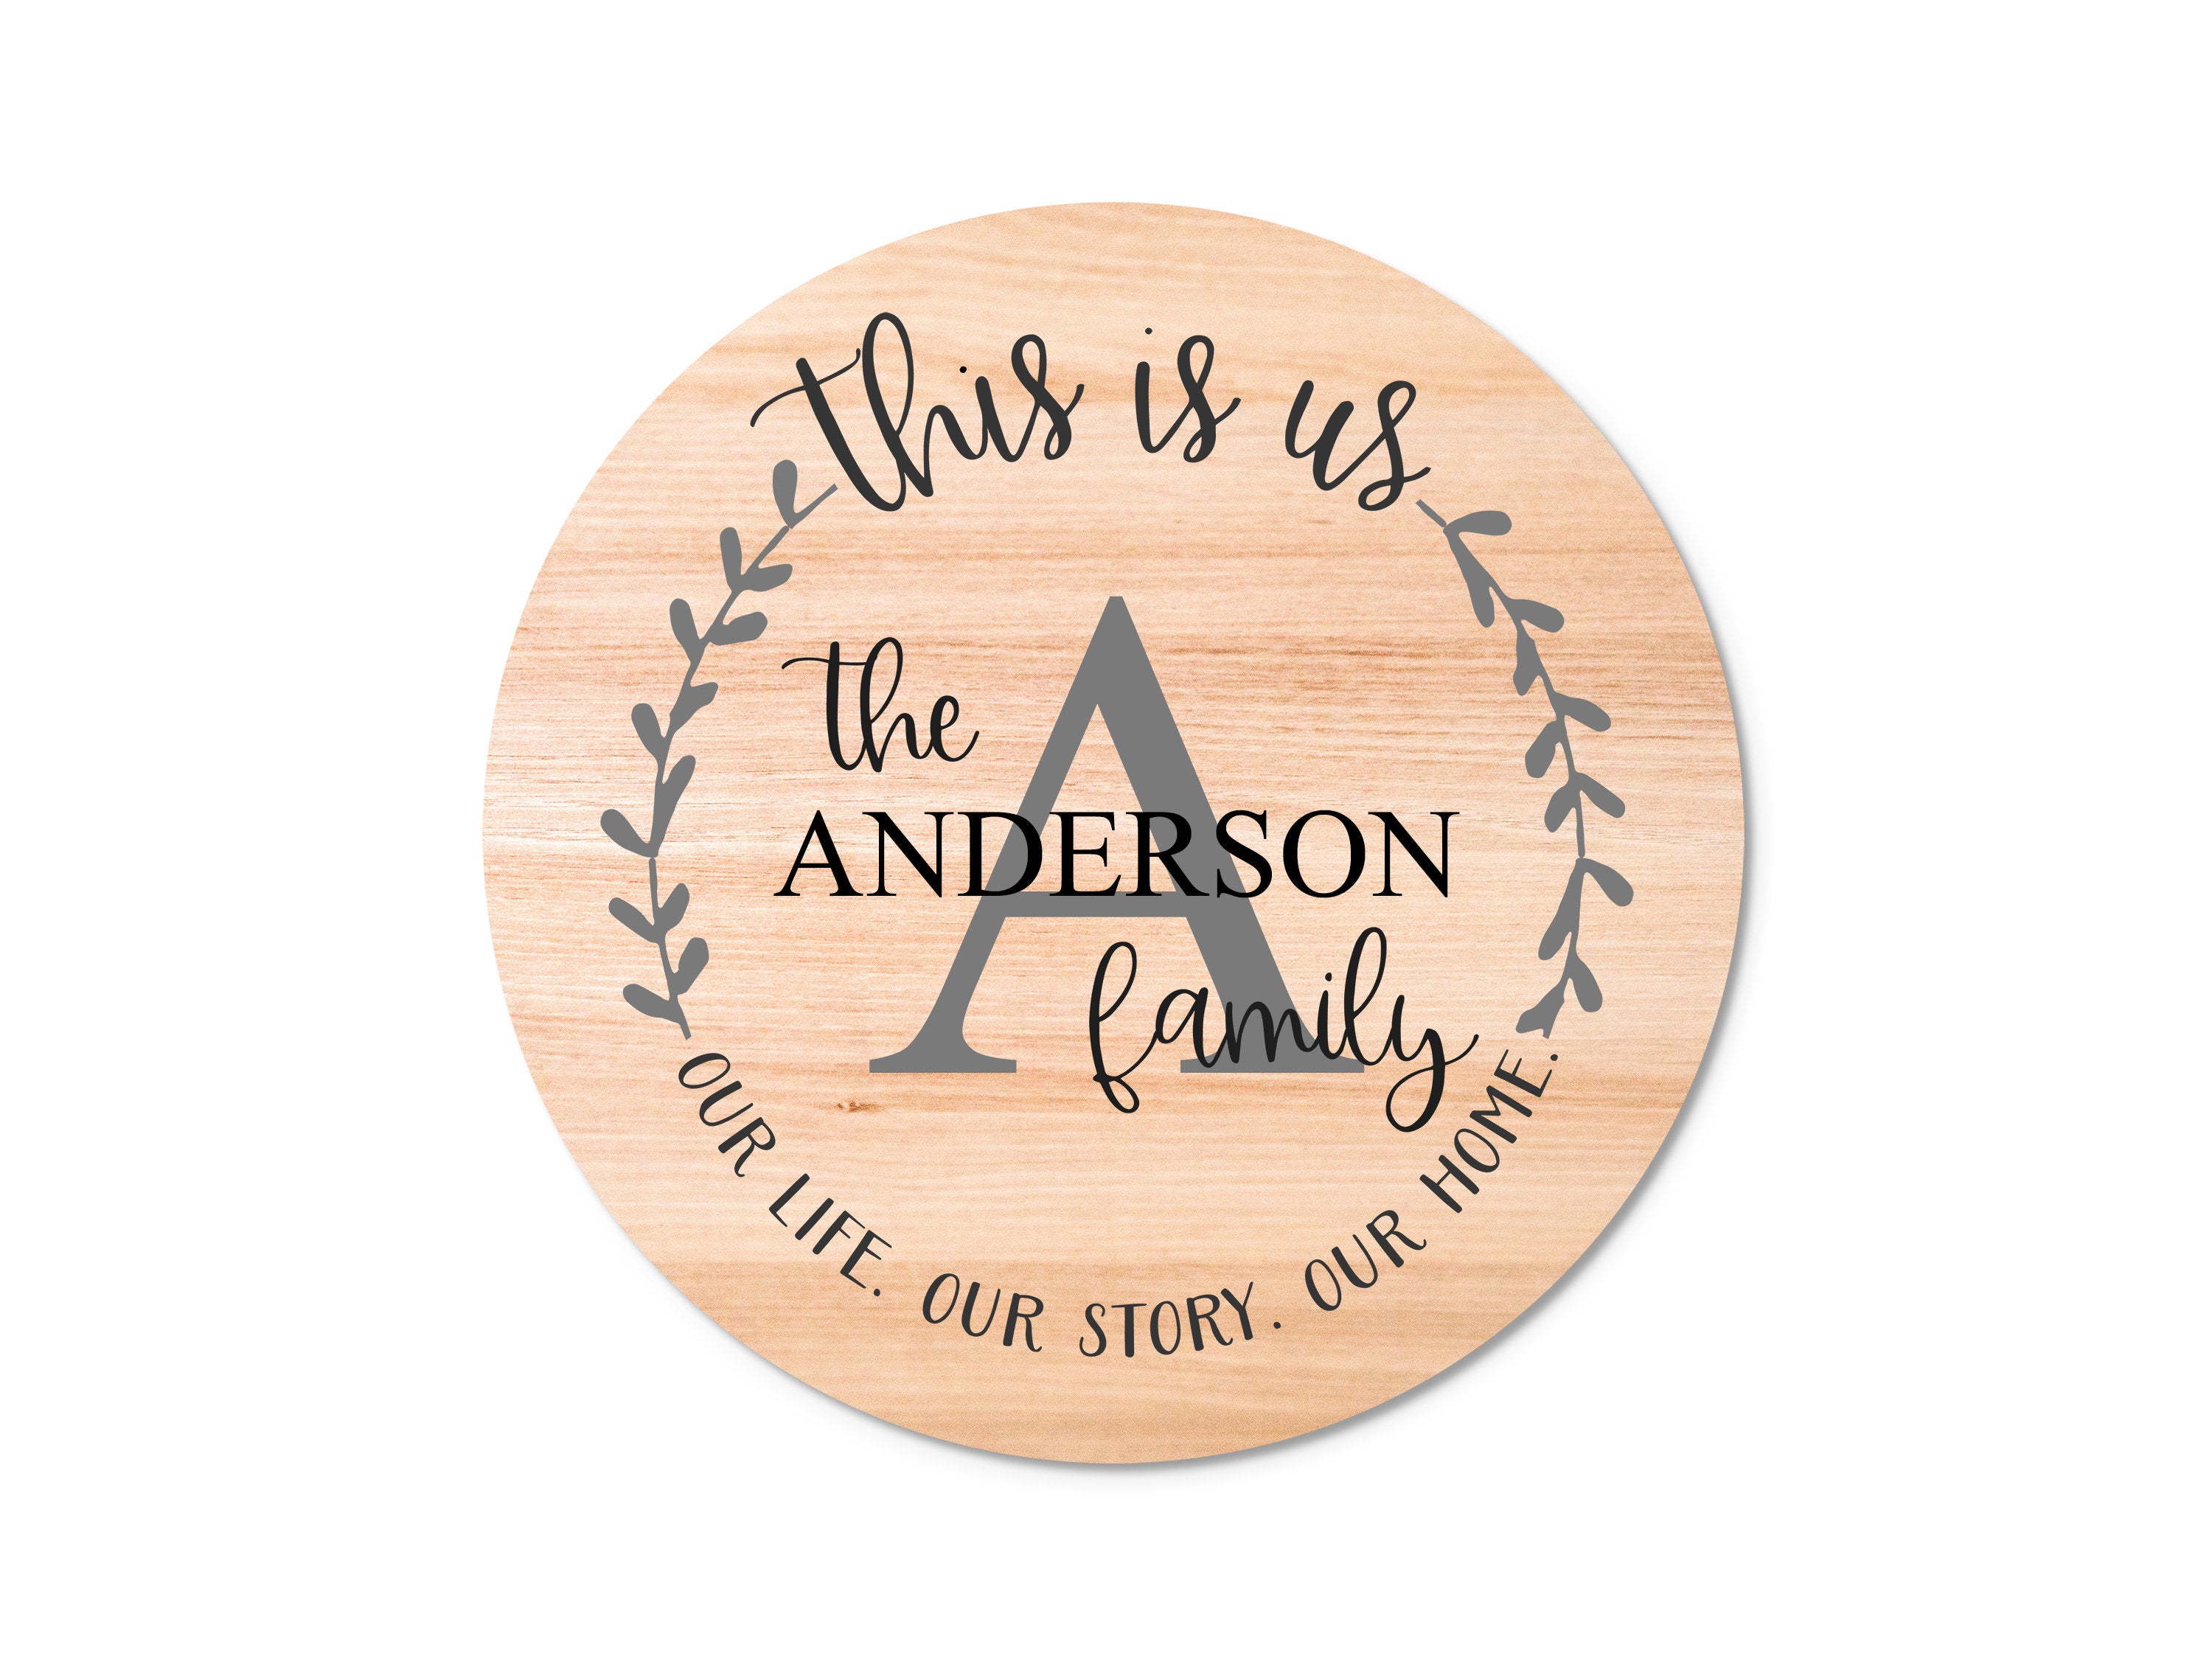 Customizable This is Us Round Wooden Plaque Sign with Family Name and Monogram in Permanent Vinyl for Home Decor, Doors, and More!